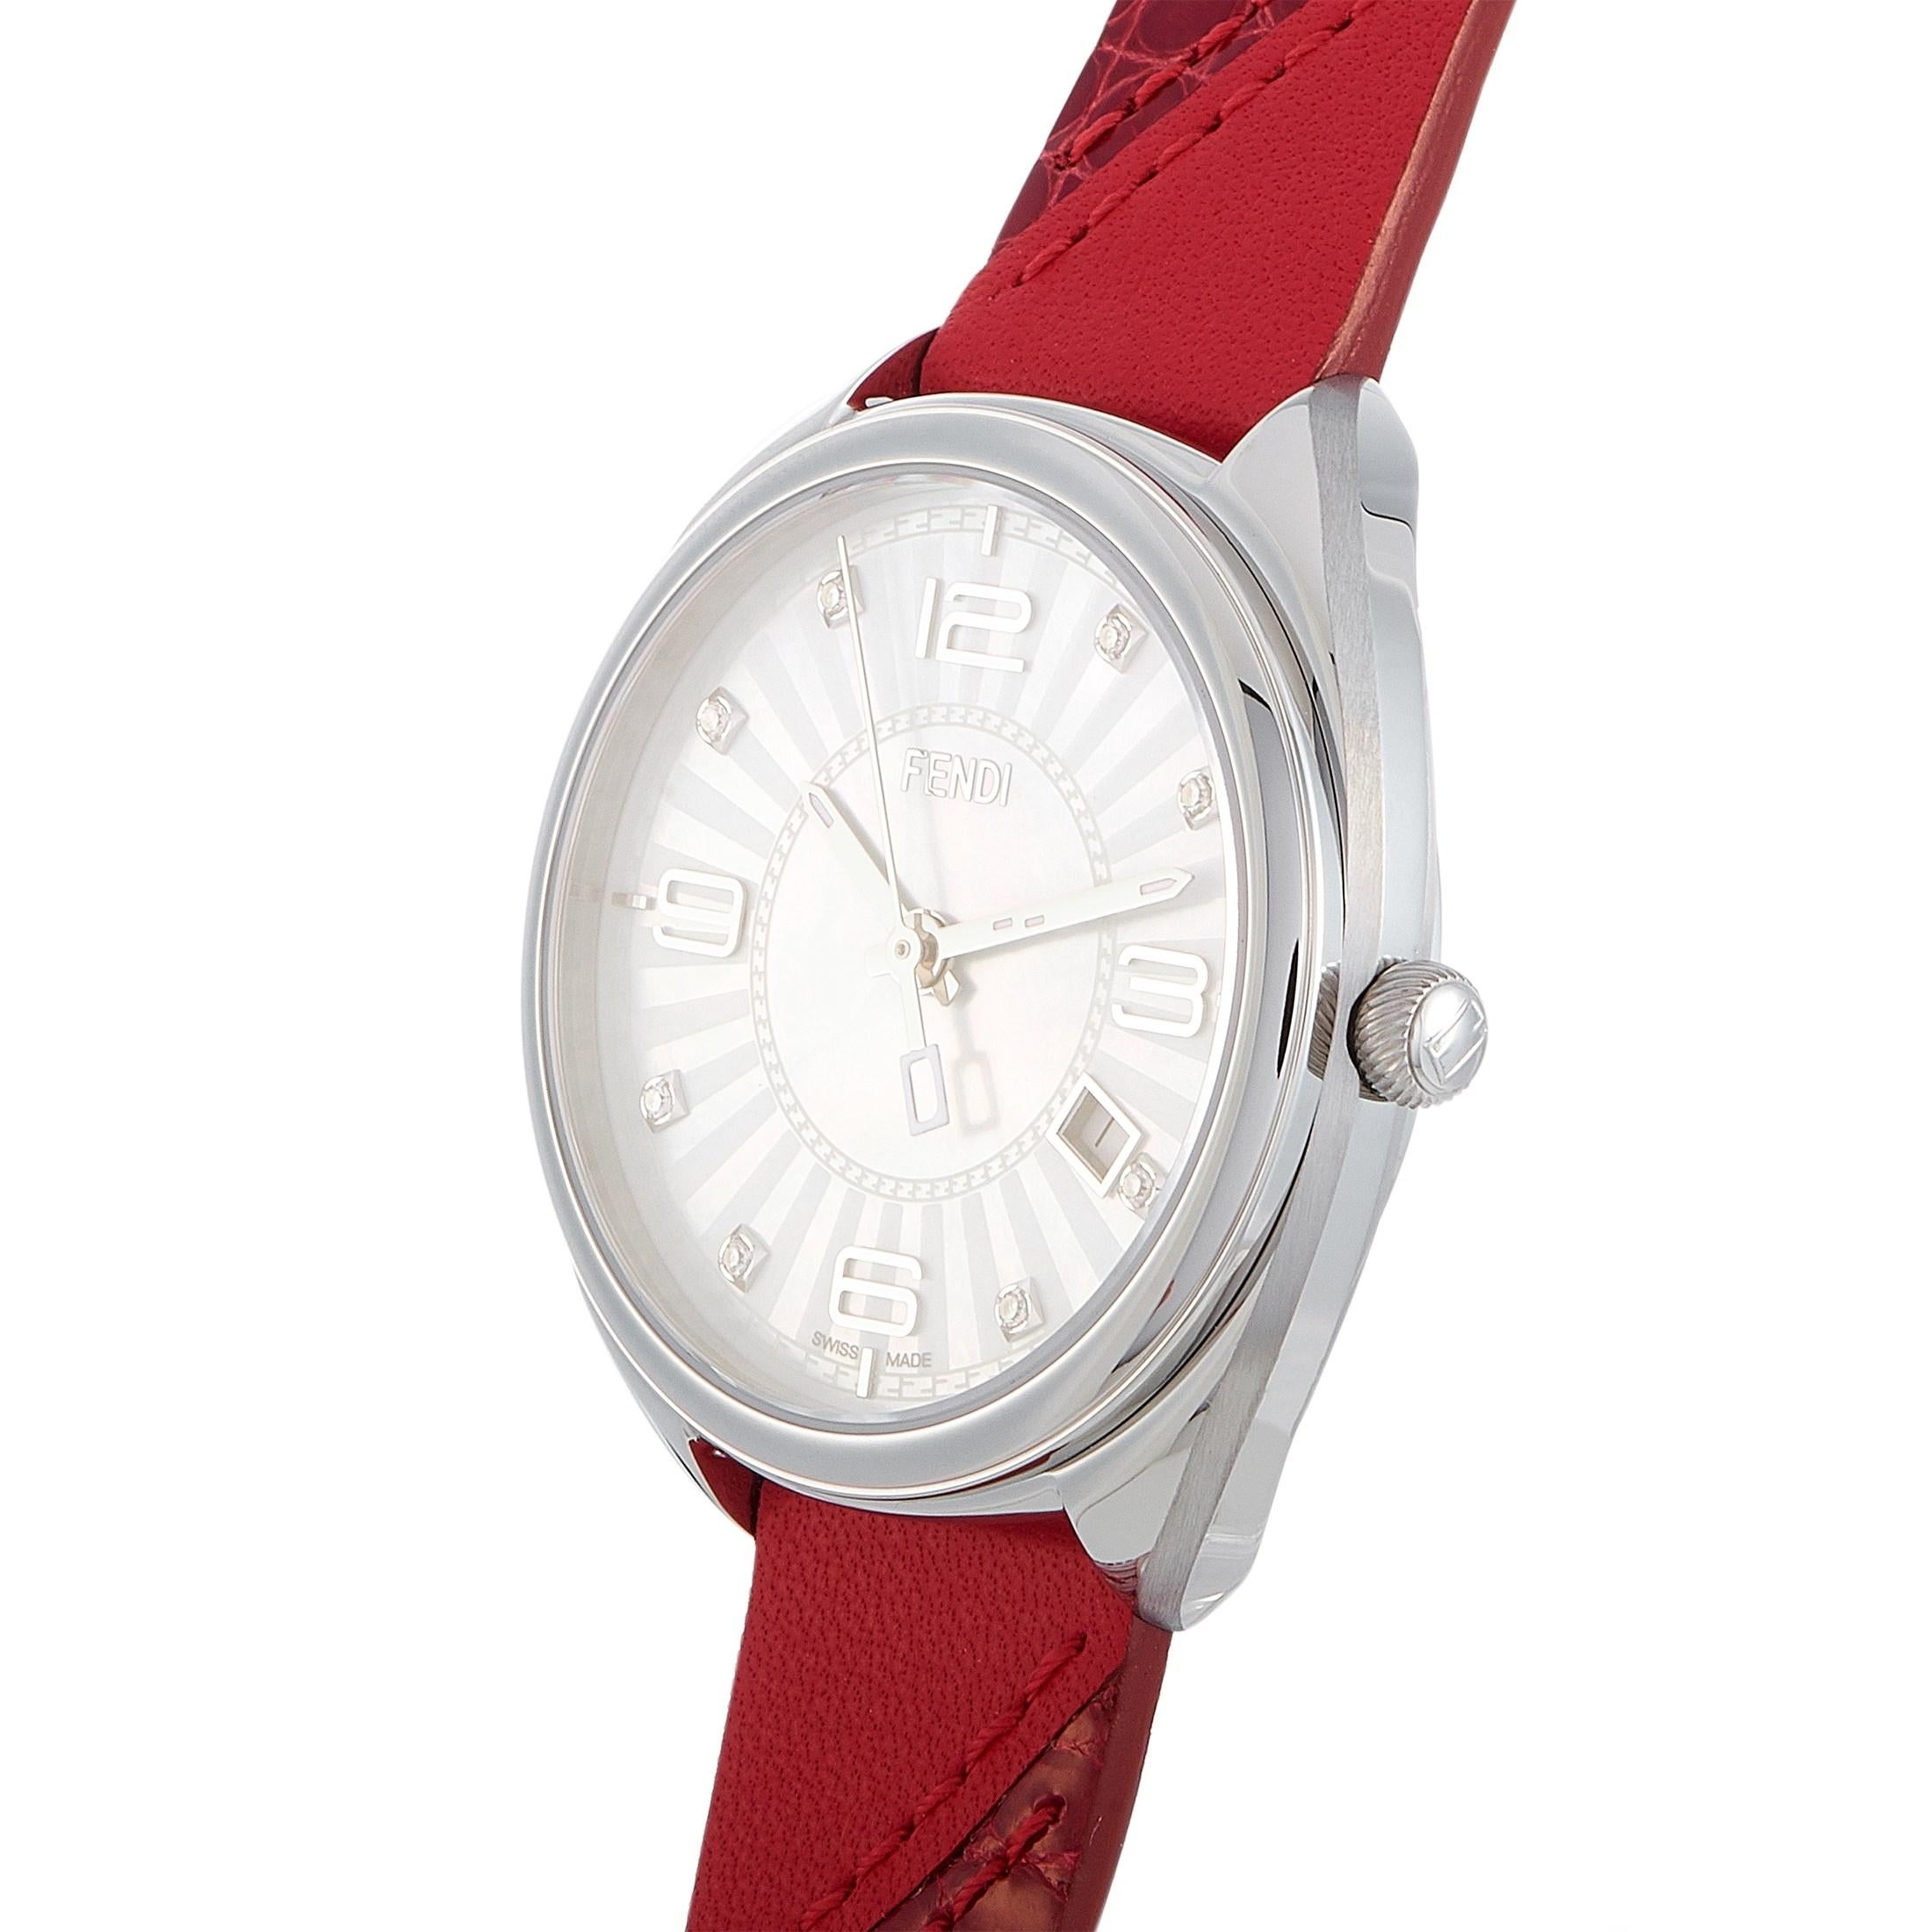 The Fendi Momento watch, reference number F217034573D1, boasts a 34 mm stainless steel case that is presented on a red leather strap, secured on the wrist with a tang buckle. This model is powered by a quartz movement and indicates hours, minutes,